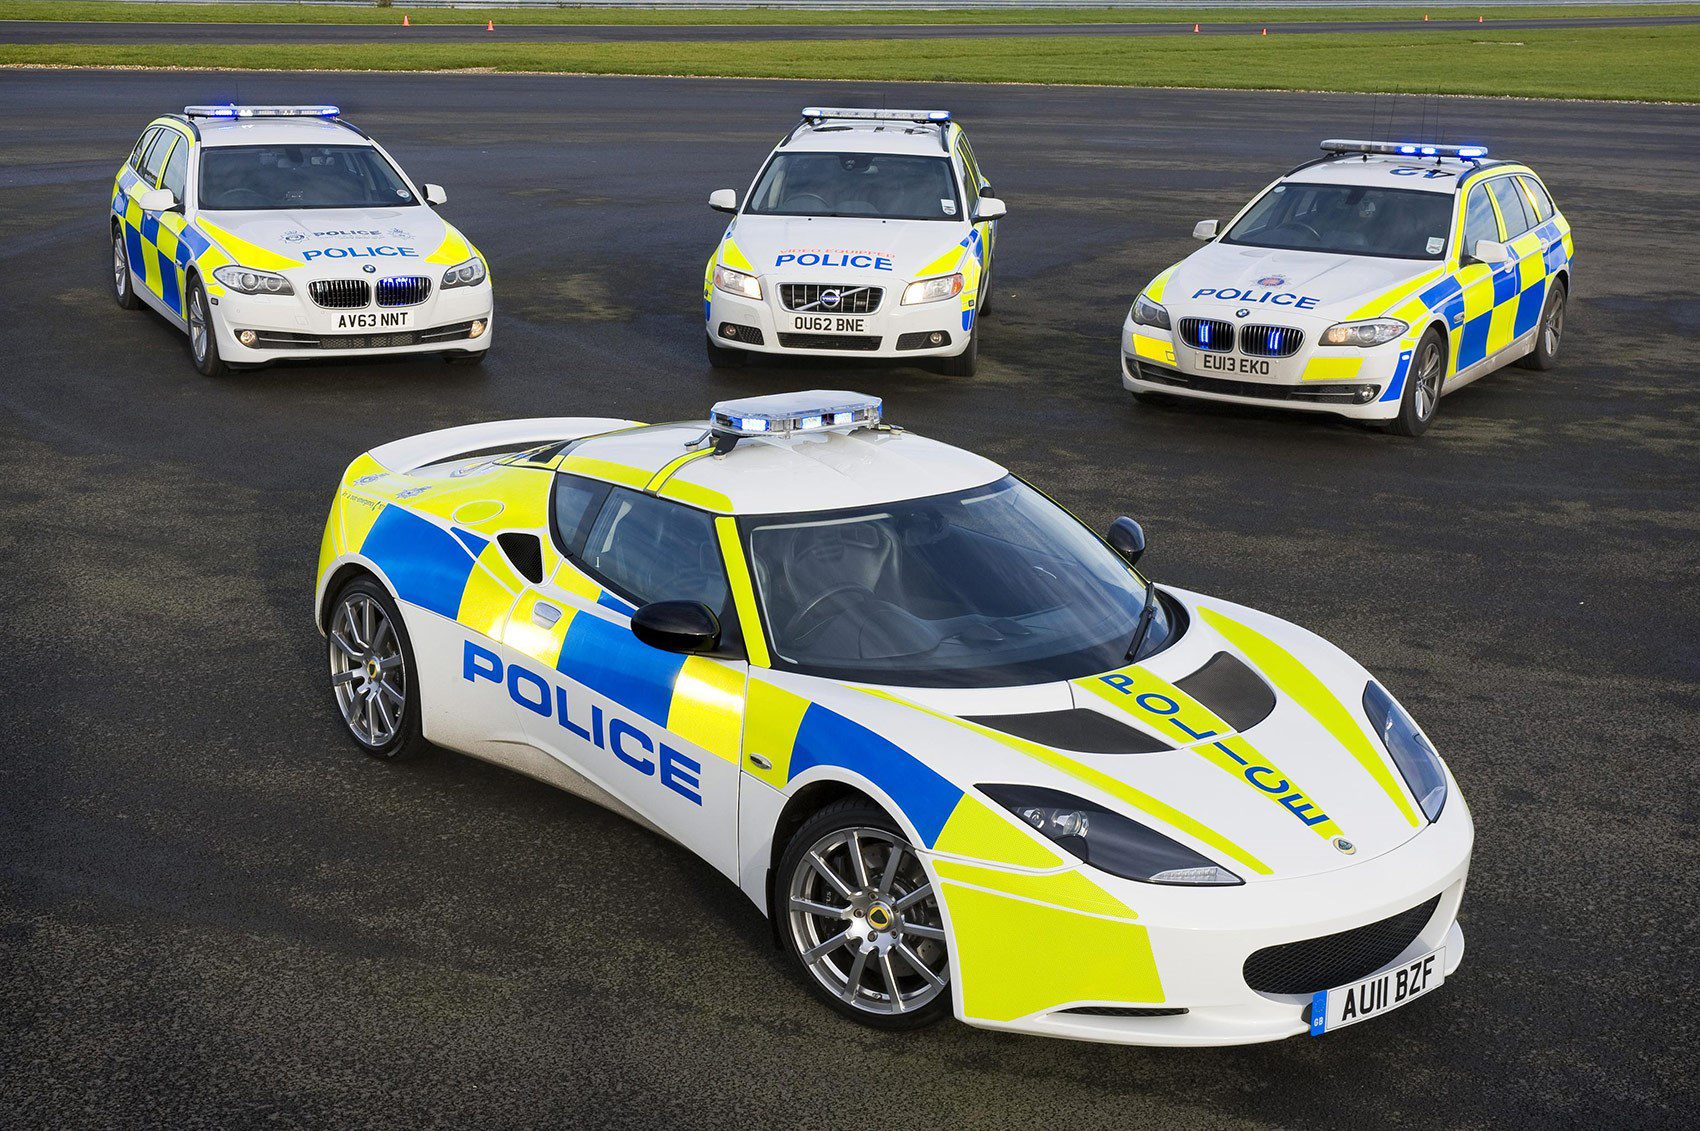 Police Car Auctions: How to Find and Buy Cars at Bargain Prices